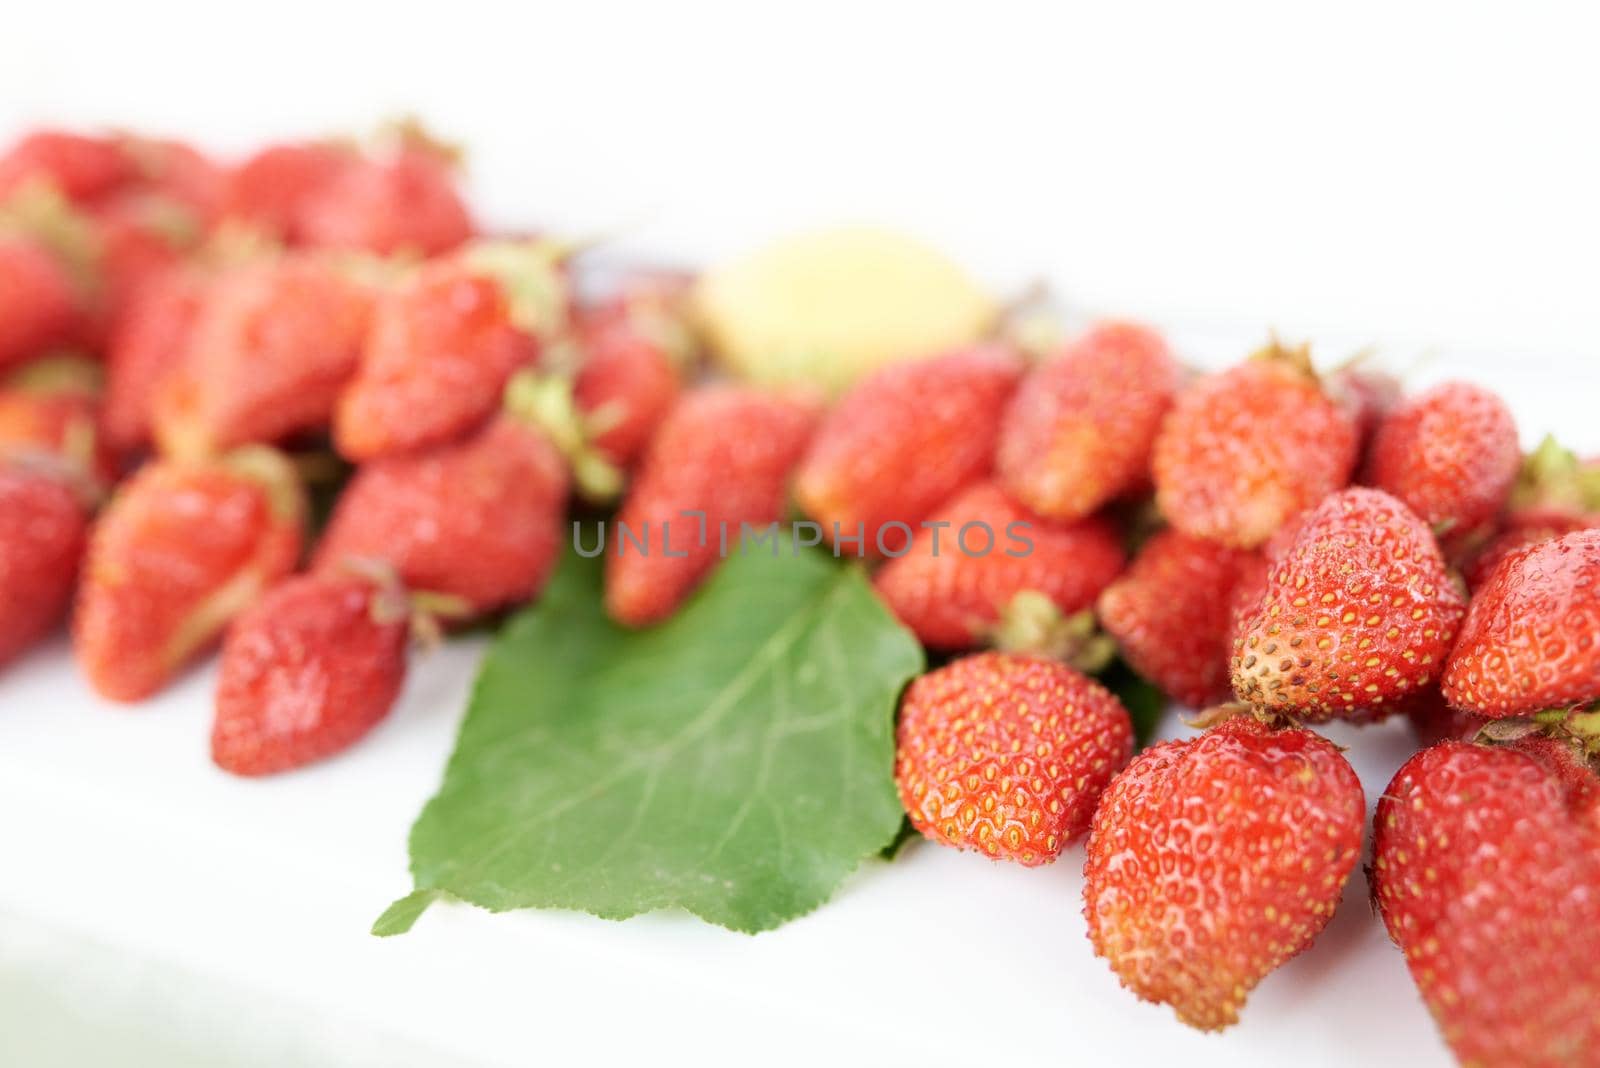 A lot of strawberries and one yellow apricot with green leaf lie on a white windowsill